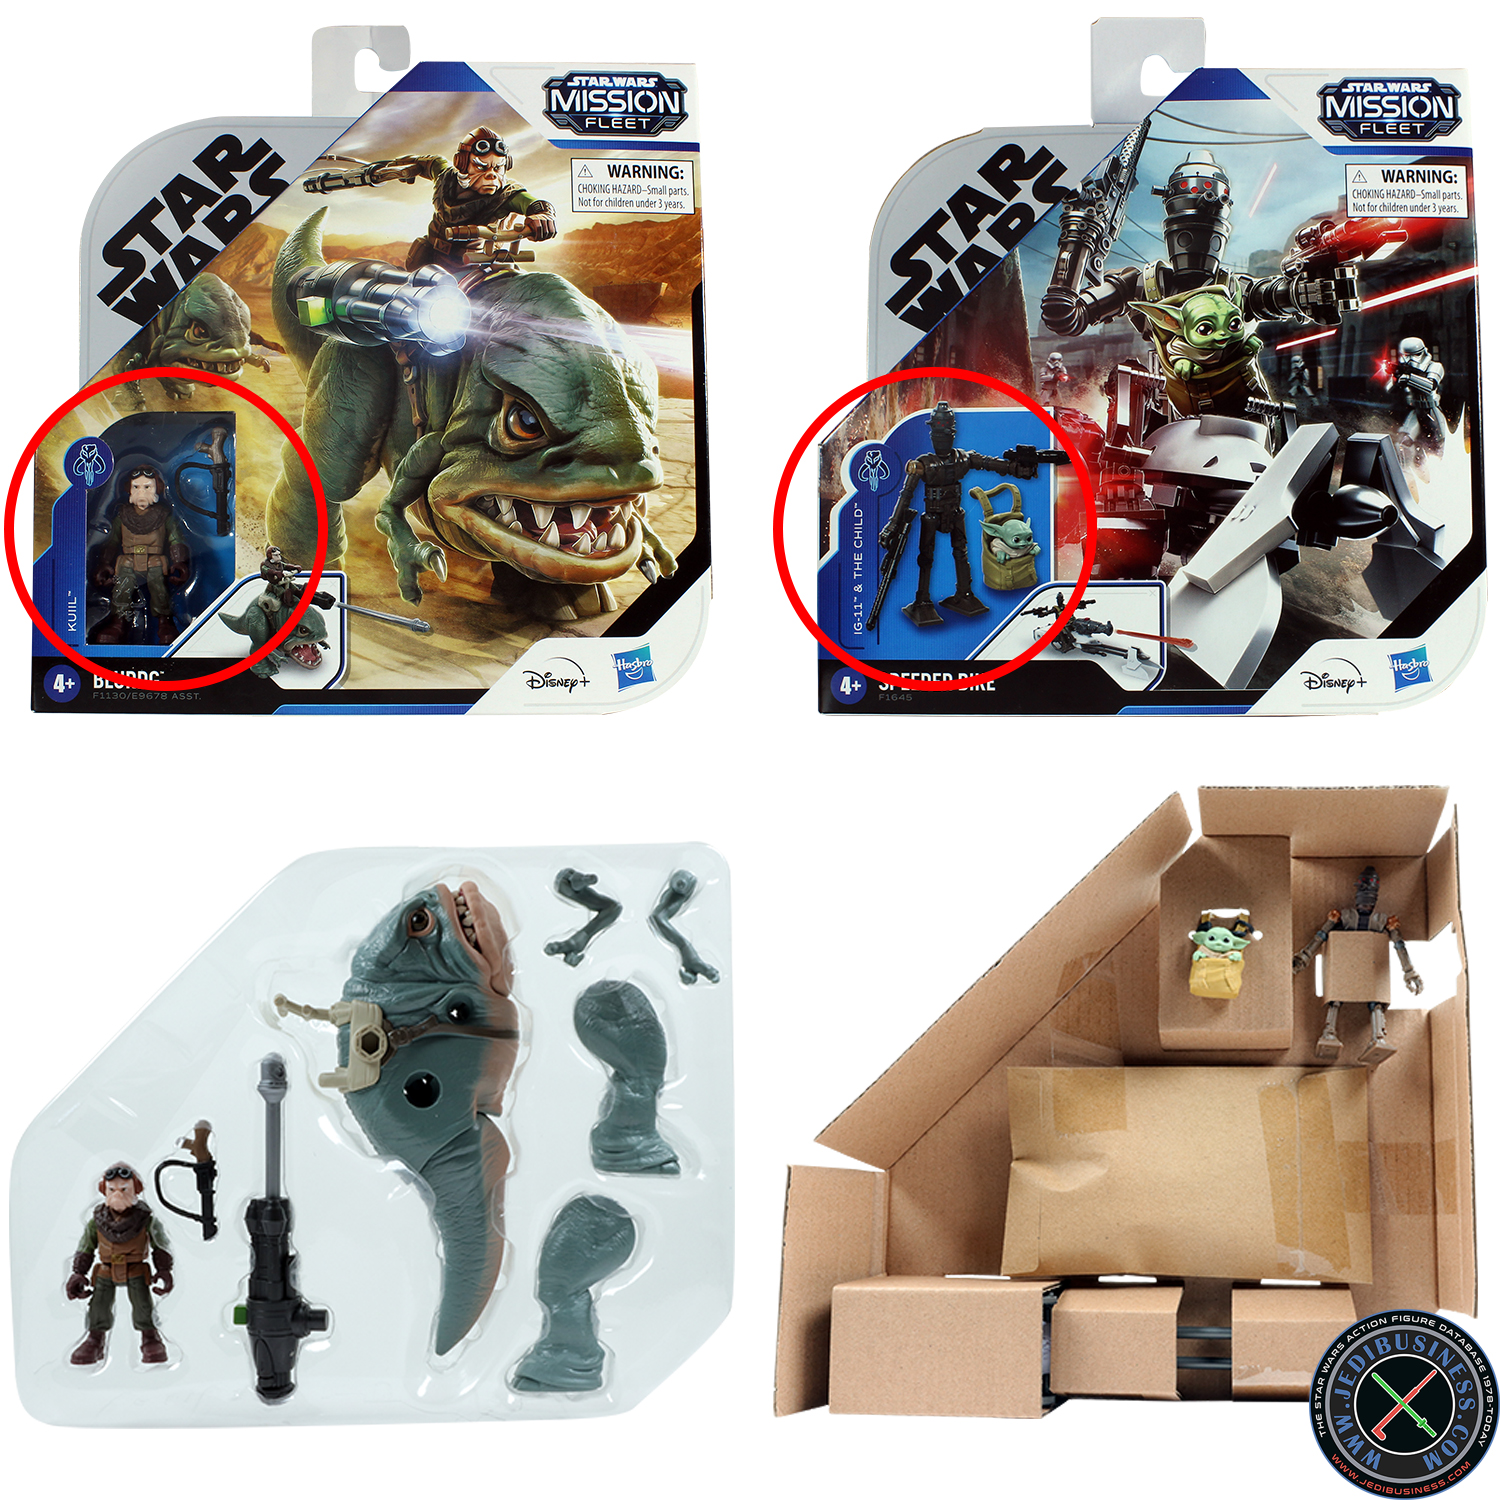 Hasbro phasing out plastic